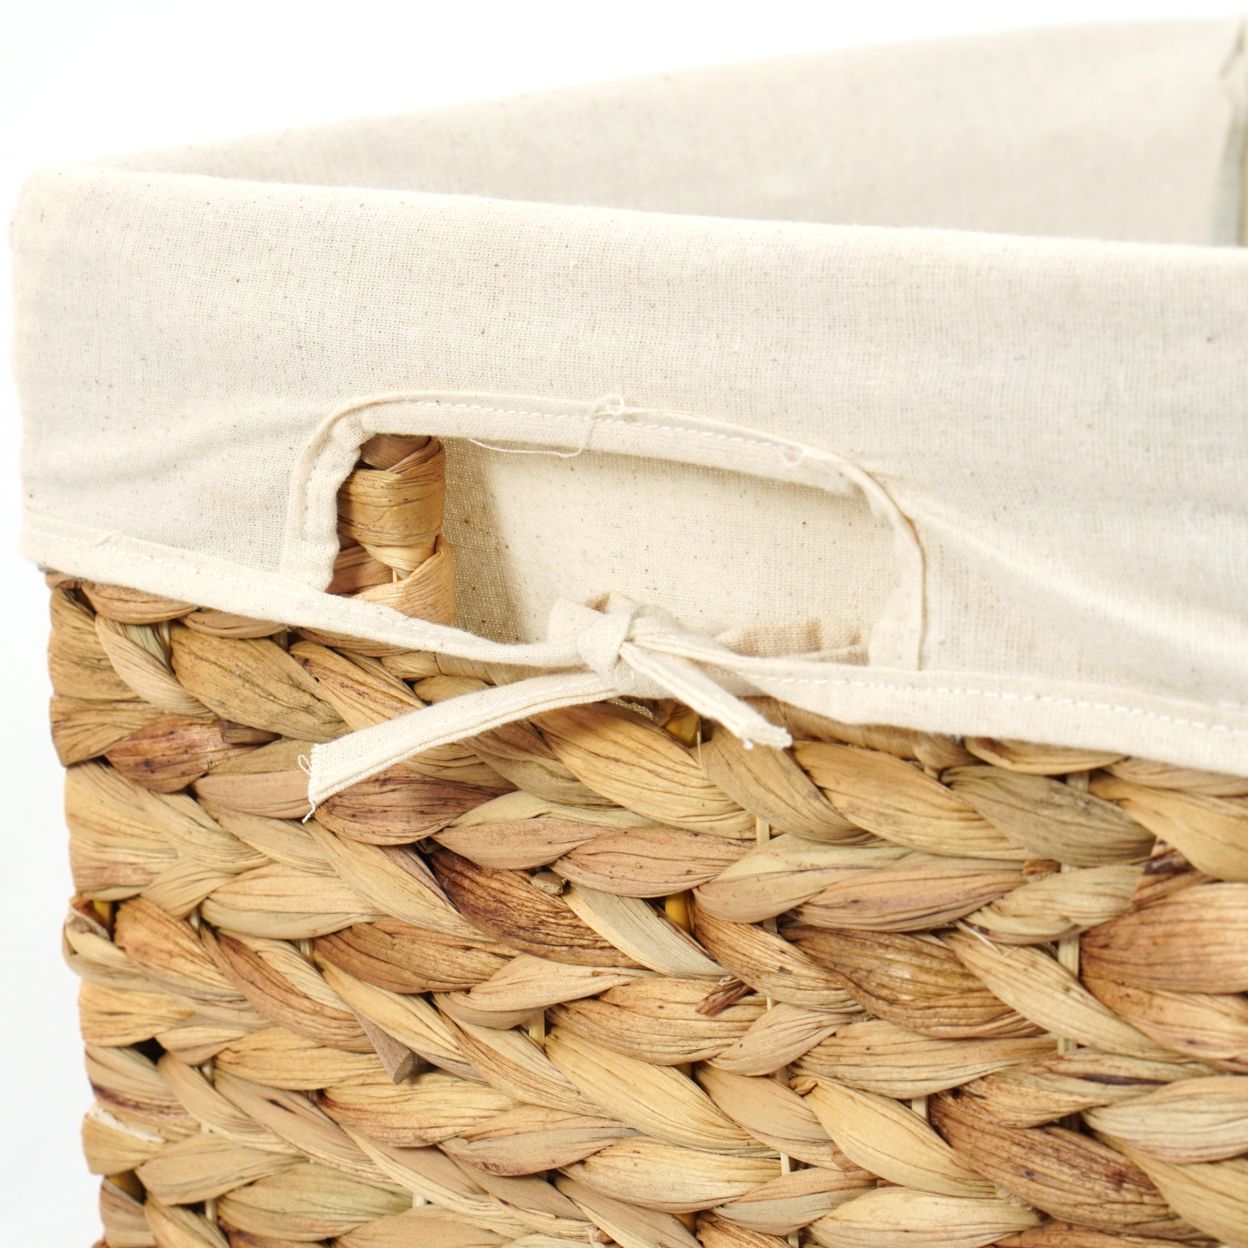 Handmade Rectangular Water Hyacinth Wicker Laundry Hamper With Lid Natural - Large